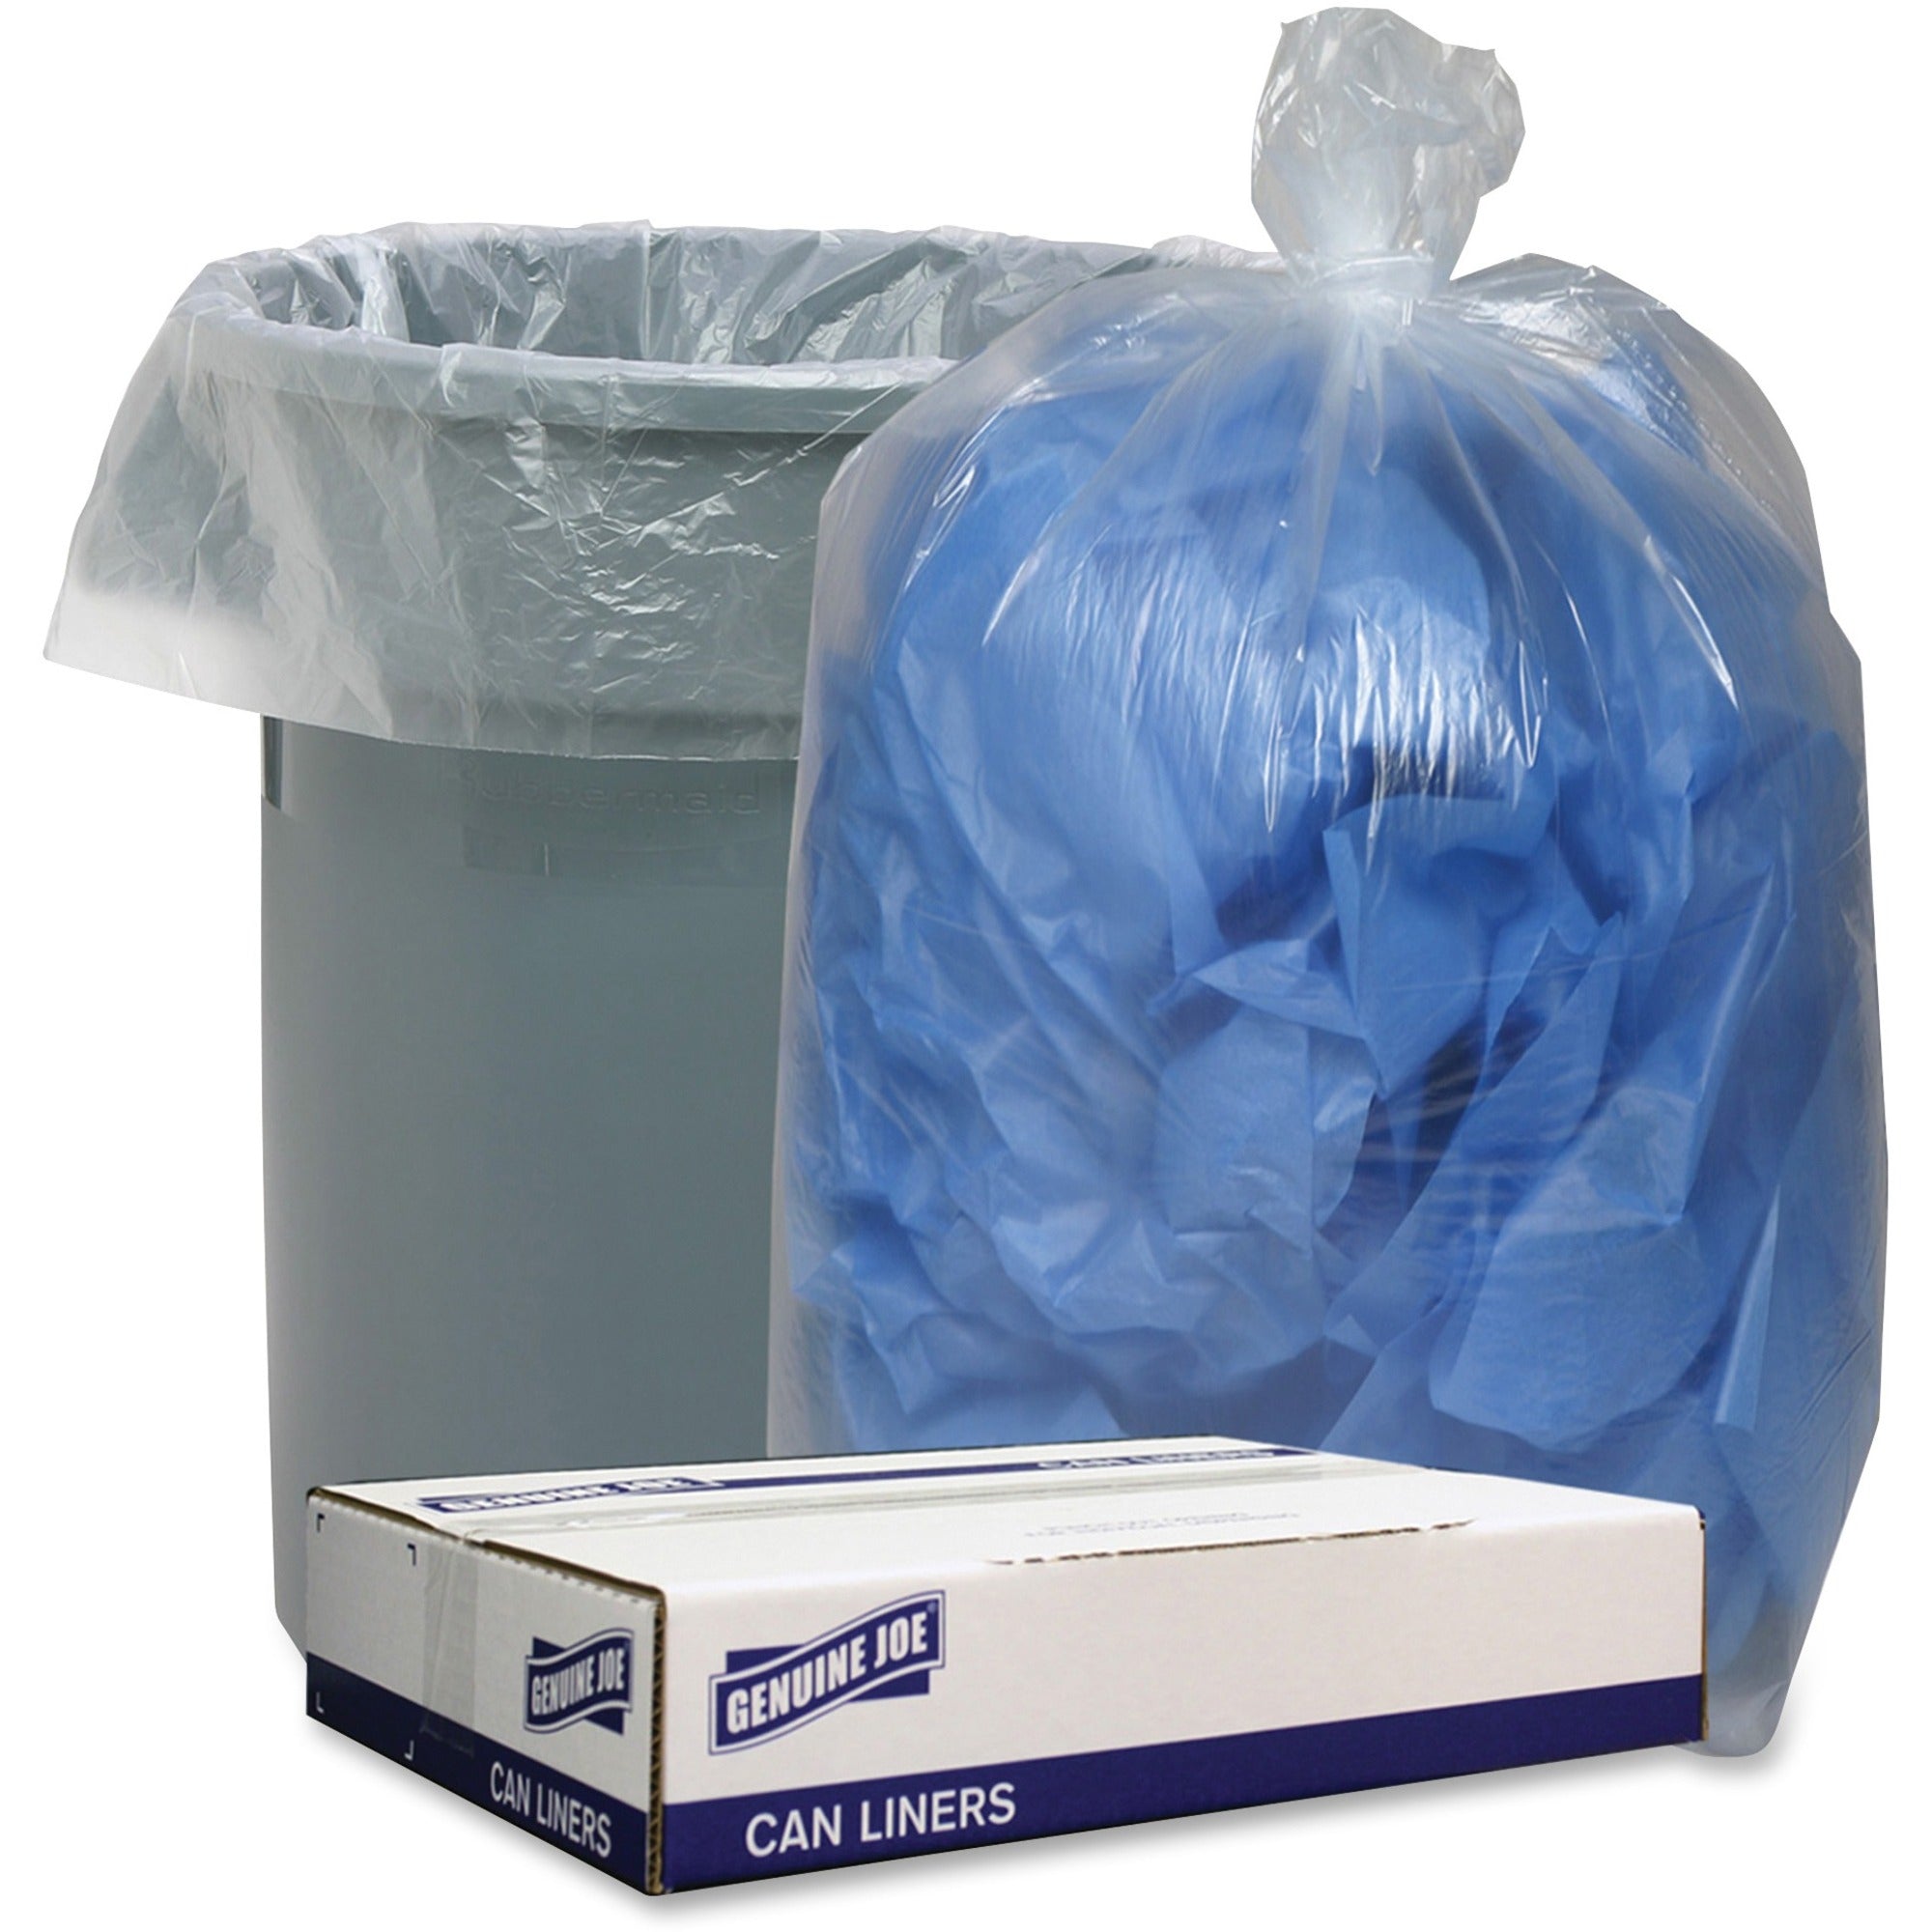 genuine-joe-low-density-can-liners-60-gal-capacity-38-width-x-58-length-140-mil-36-micron-thickness-low-density-clear-100-carton-recycled_gjo29131 - 1